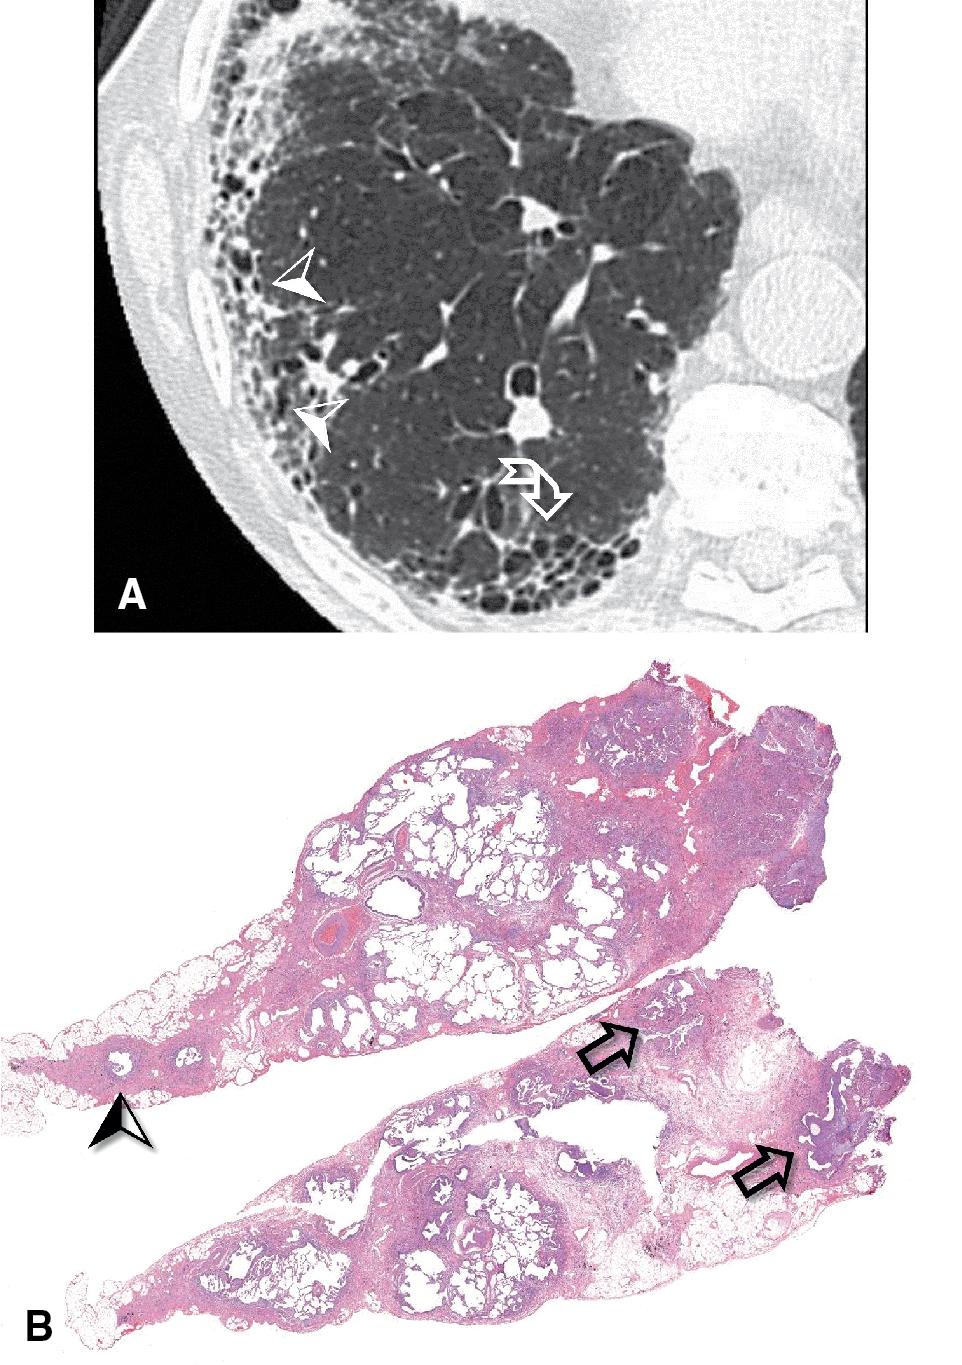 Figure 4.46, Fibrotic pattern, subset usual interstitial pneumonia. (A) High-resolution computed tomography image shows basal cluster of subpleural honeycombing (curved arrow) together with patchy fibrosing reticulation and traction bronchiolectasis (arrowheads) . (B) Histology shows patchy, dense, subpleural fibrosis with honeycombing (arrows) and bronchiectasis (arrowhead) .